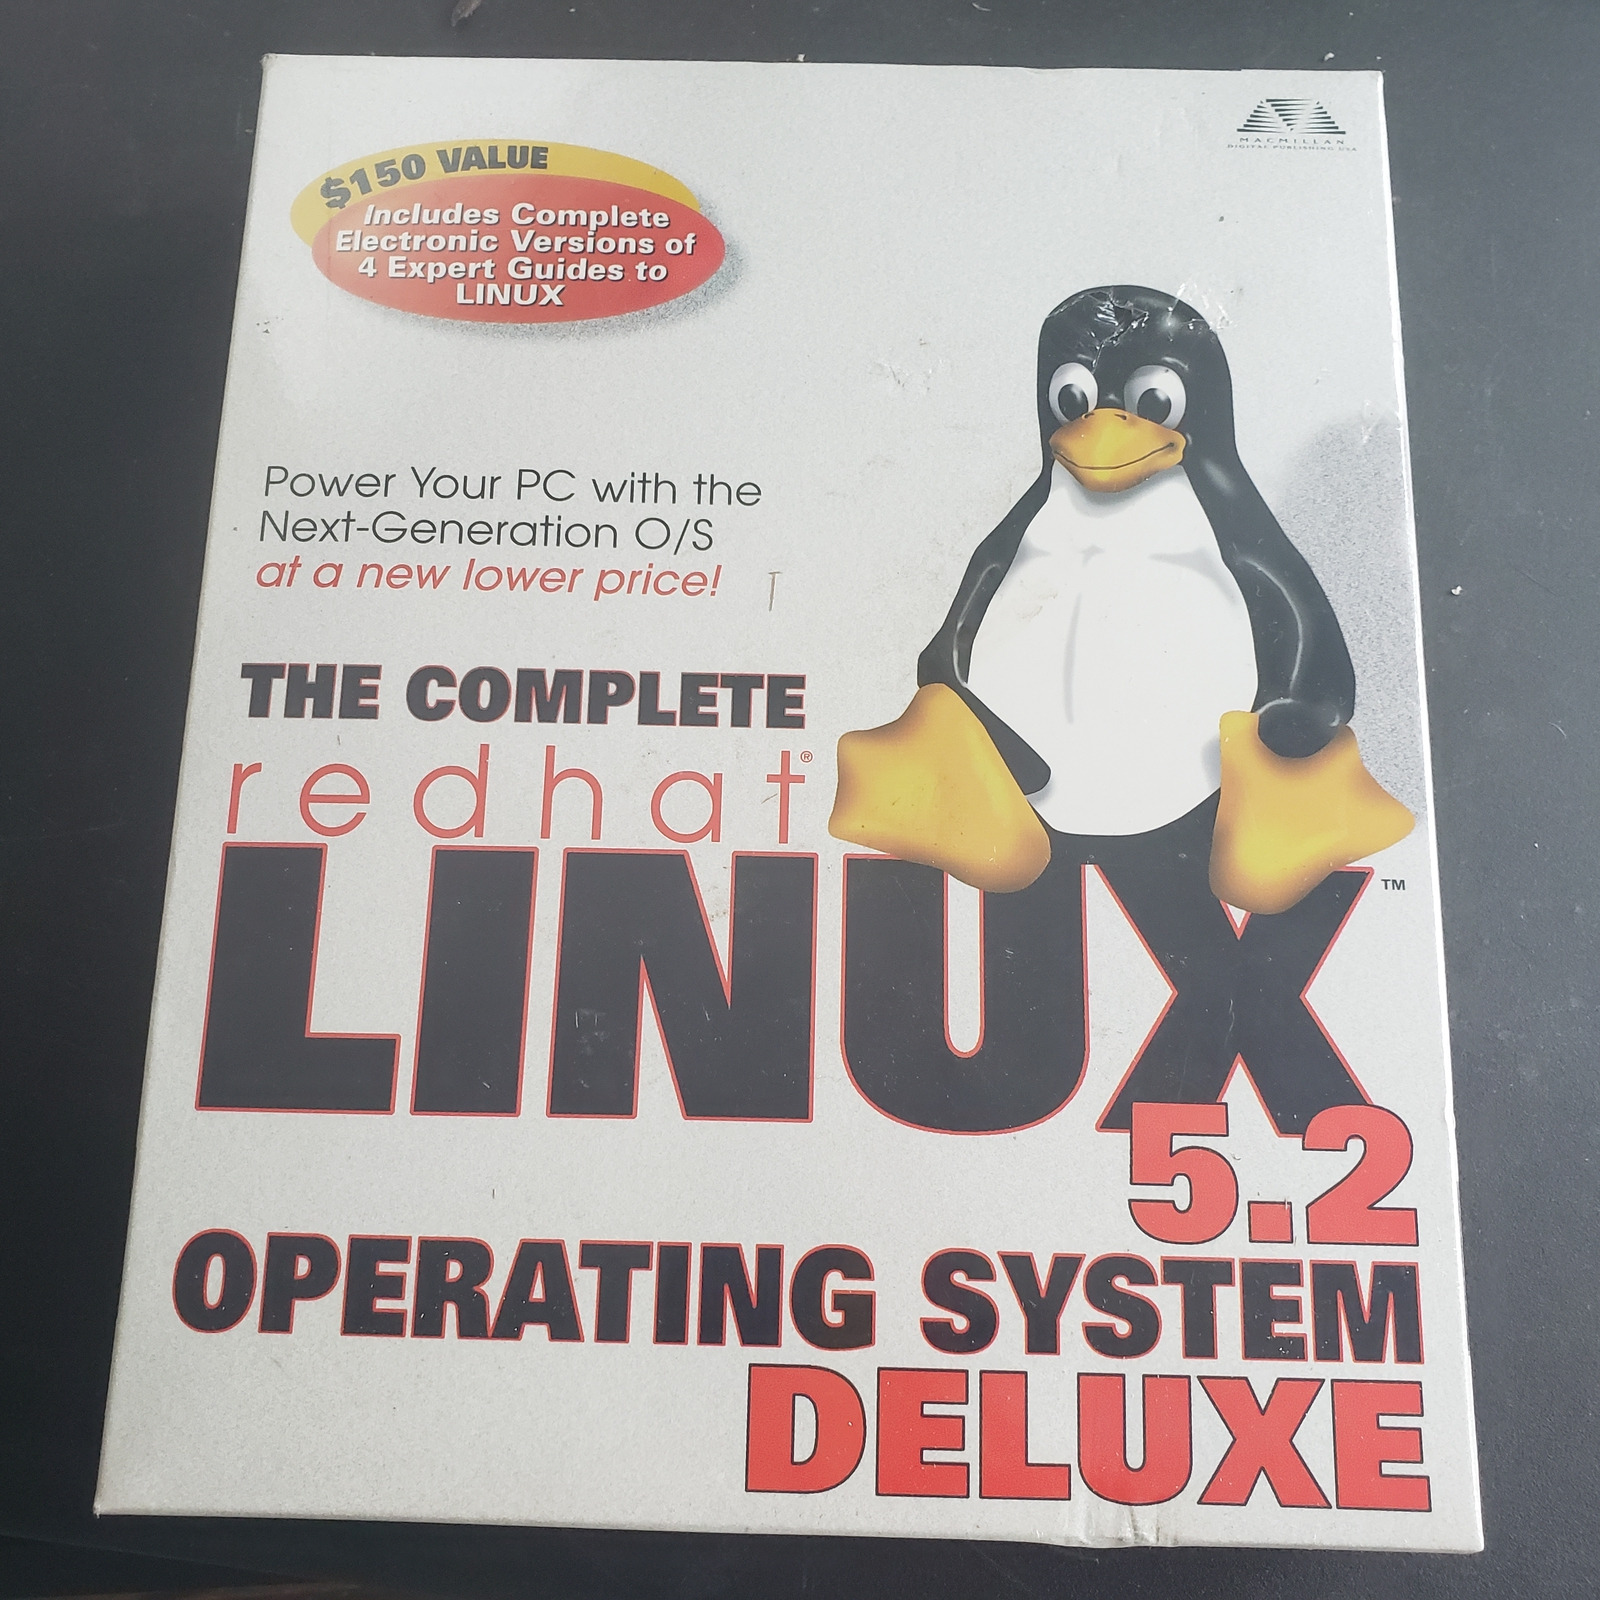 The Complete Redhat Linux 5.2 Operating System Deluxe CD Software Installer